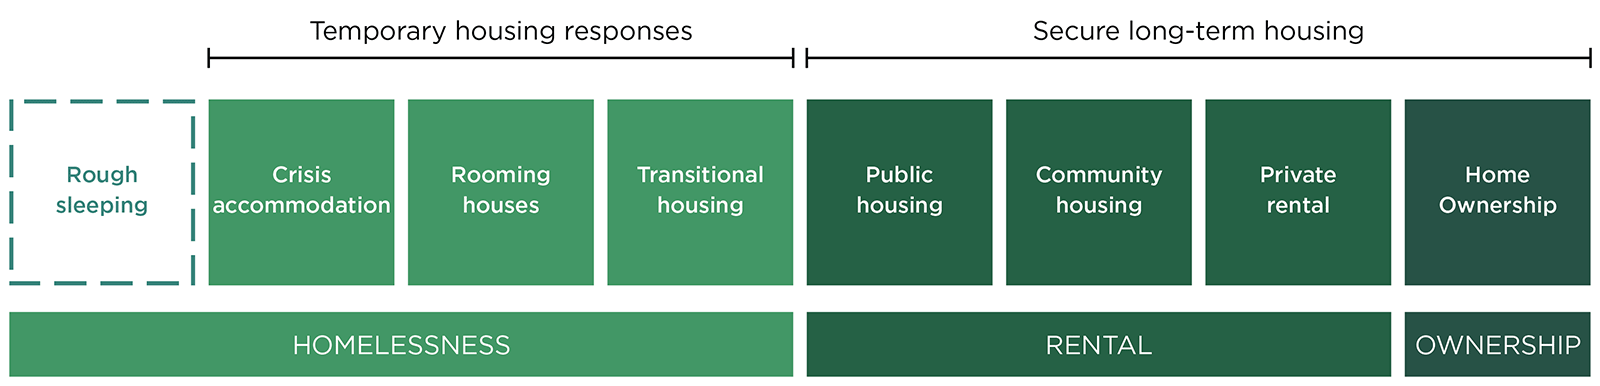 Diagram representing the housing spectrum, which comprises: rough sleeping, homelessness, rental housing and ownership. See summary for a longer description.